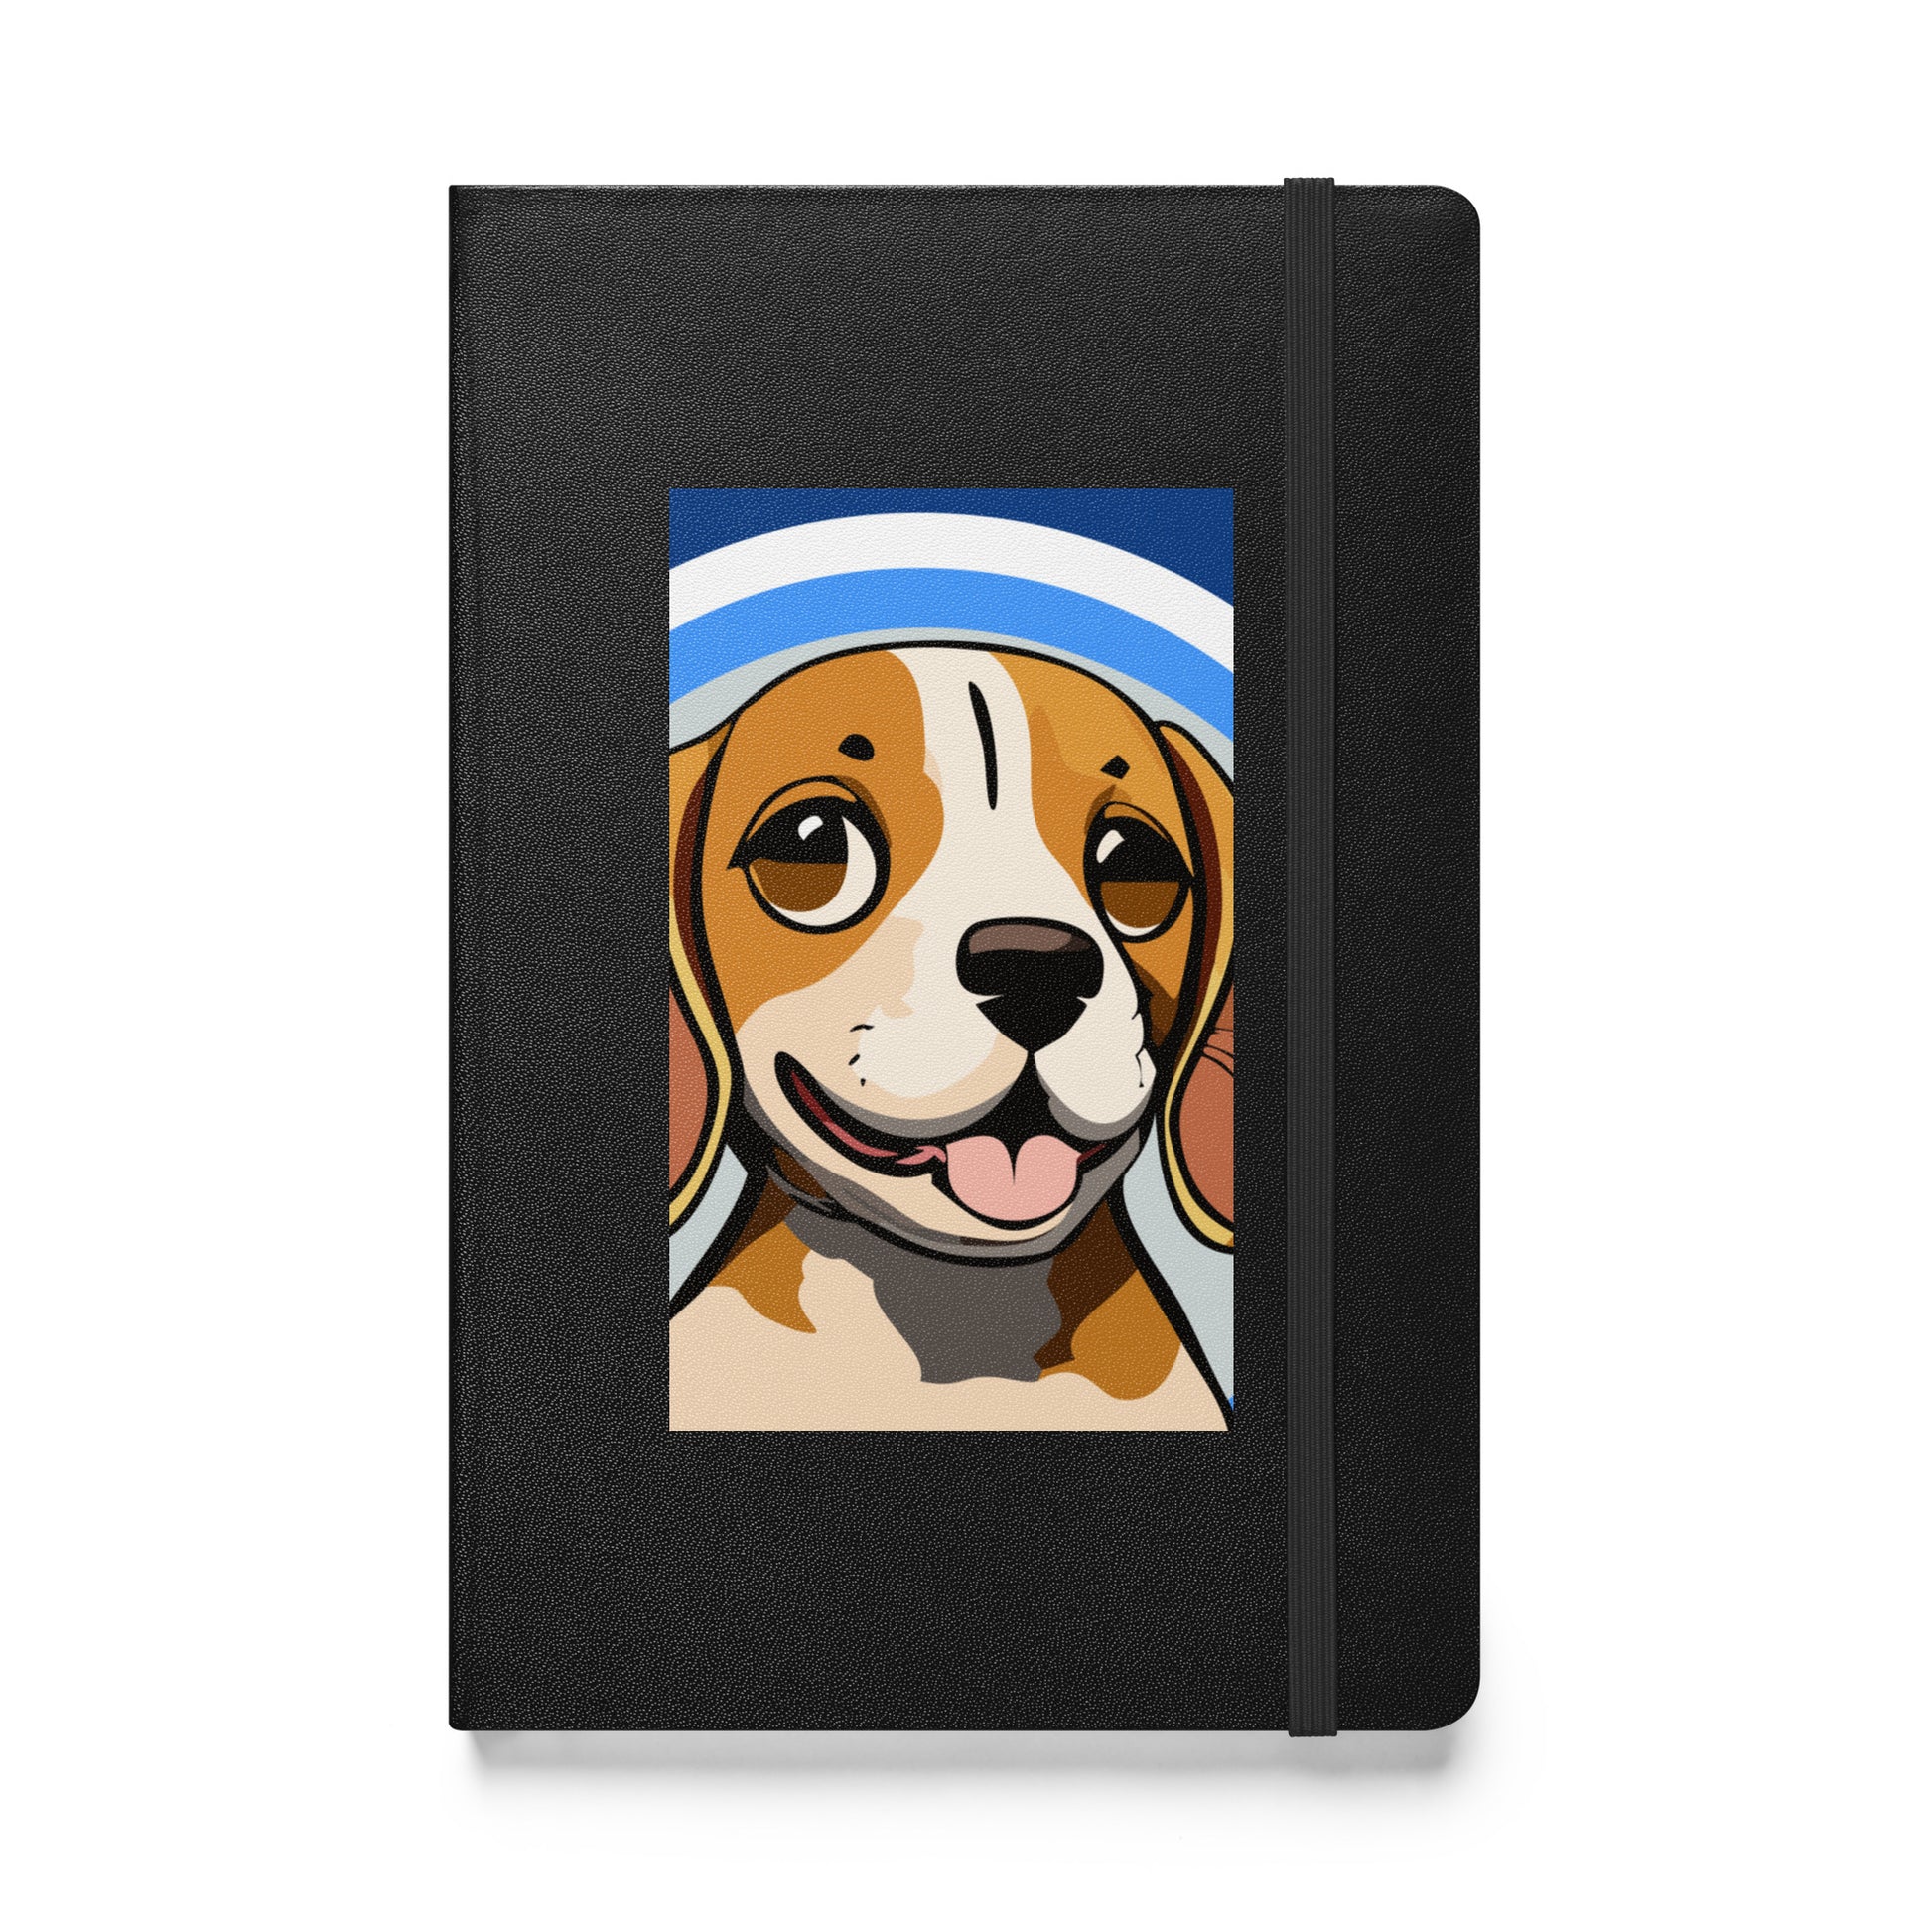 Hardcover notebook in black color, with cute beagle on cover